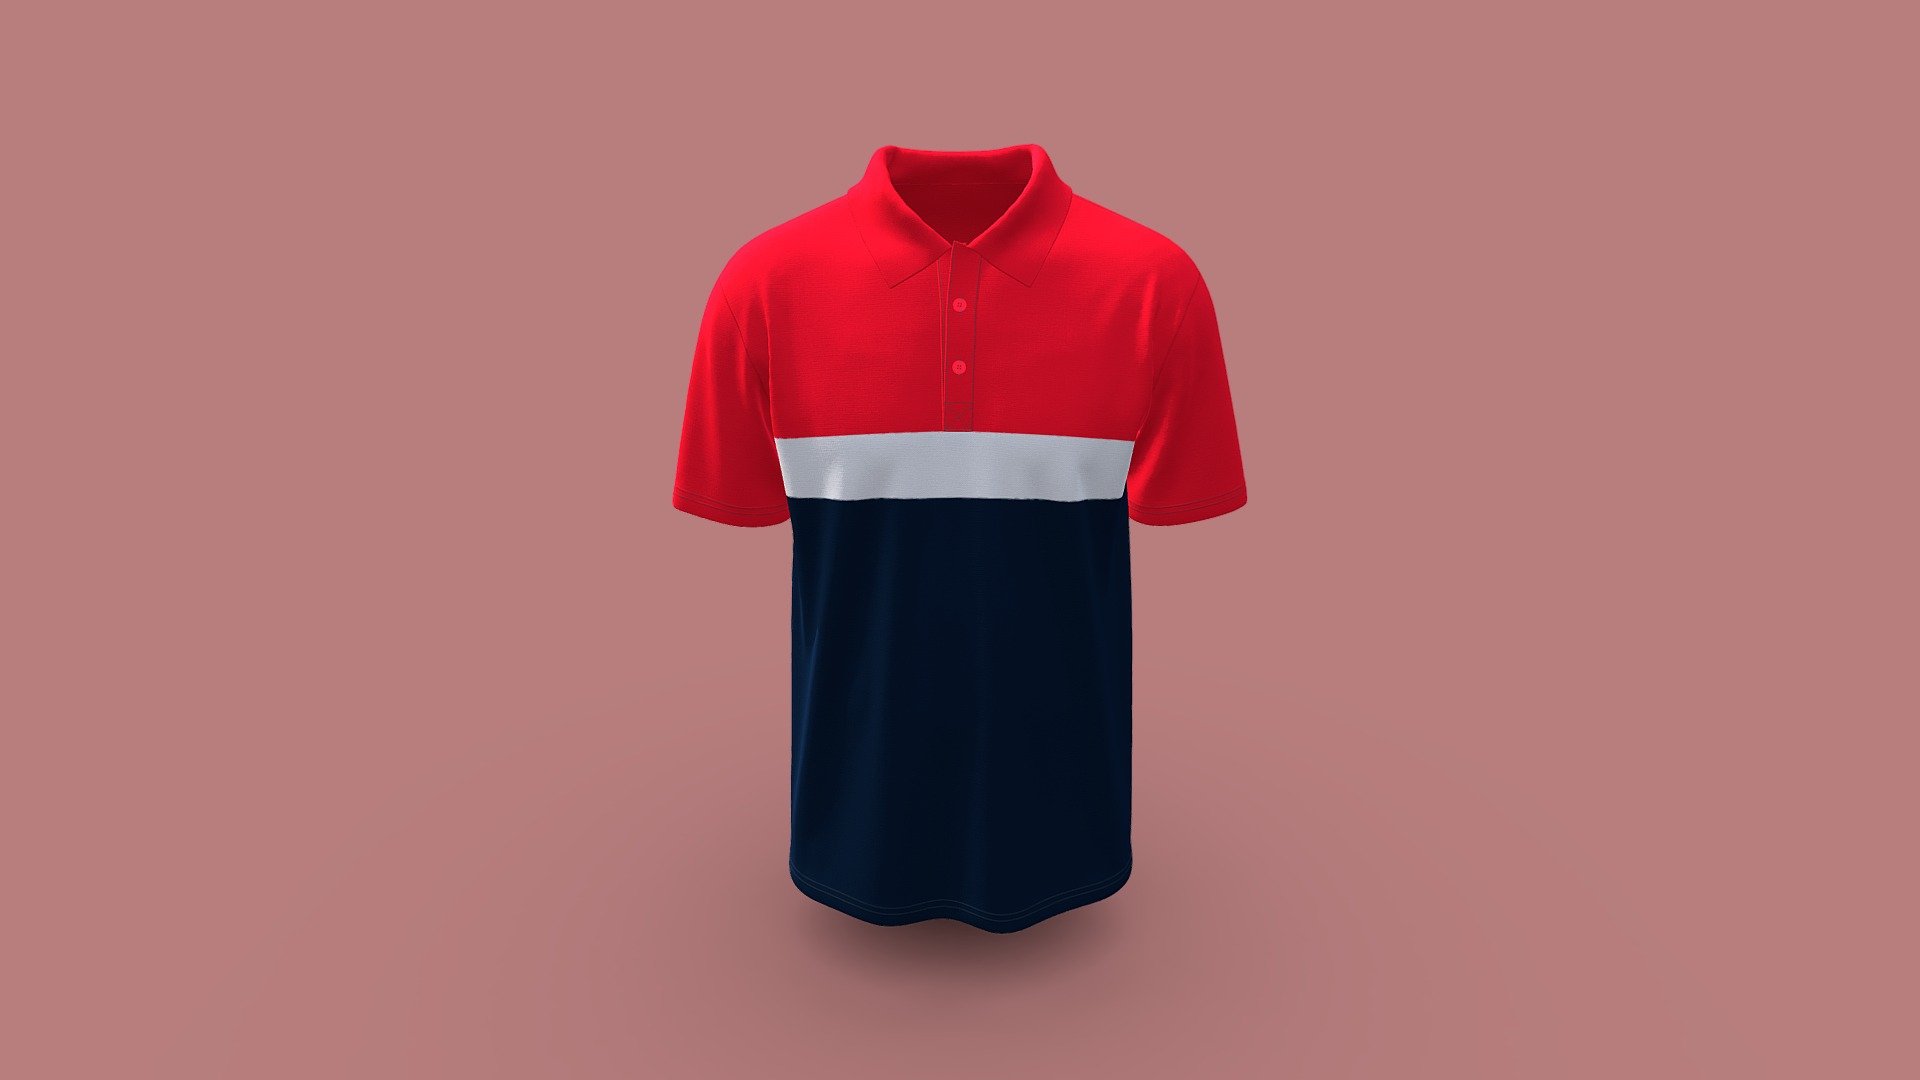 Cloth Title = Basic Polo Design 

SKU = DG100146 

Category = Unisex 

Product Type = Polo 

Cloth Length = Regular 

Body Fit = Regular Fit 

Occasion = Casual  

Sleeve Style = Set In Sleeve 


Our Services:

3D Apparel Design.

OBJ,FBX,GLTF Making with High/Low Poly.

Fabric Digitalization.

Mockup making.

3D Teck Pack.

Pattern Making.

2D Illustration.

Cloth Animation and 360 Spin Video.


Contact us:- 

Email: info@digitalfashionwear.com 

Website: https://digitalfashionwear.com 


We designed all the types of cloth specially focused on product visualization, e-commerce, fitting, and production. 

We will design: 

T-shirts 

Polo shirts 

Hoodies 

Sweatshirt 

Jackets 

Shirts 

TankTops 

Trousers 

Bras 

Underwear 

Blazer 

Aprons 

Leggings 

and All Fashion items. 





Our goal is to make sure what we provide you, meets your demand 3d model